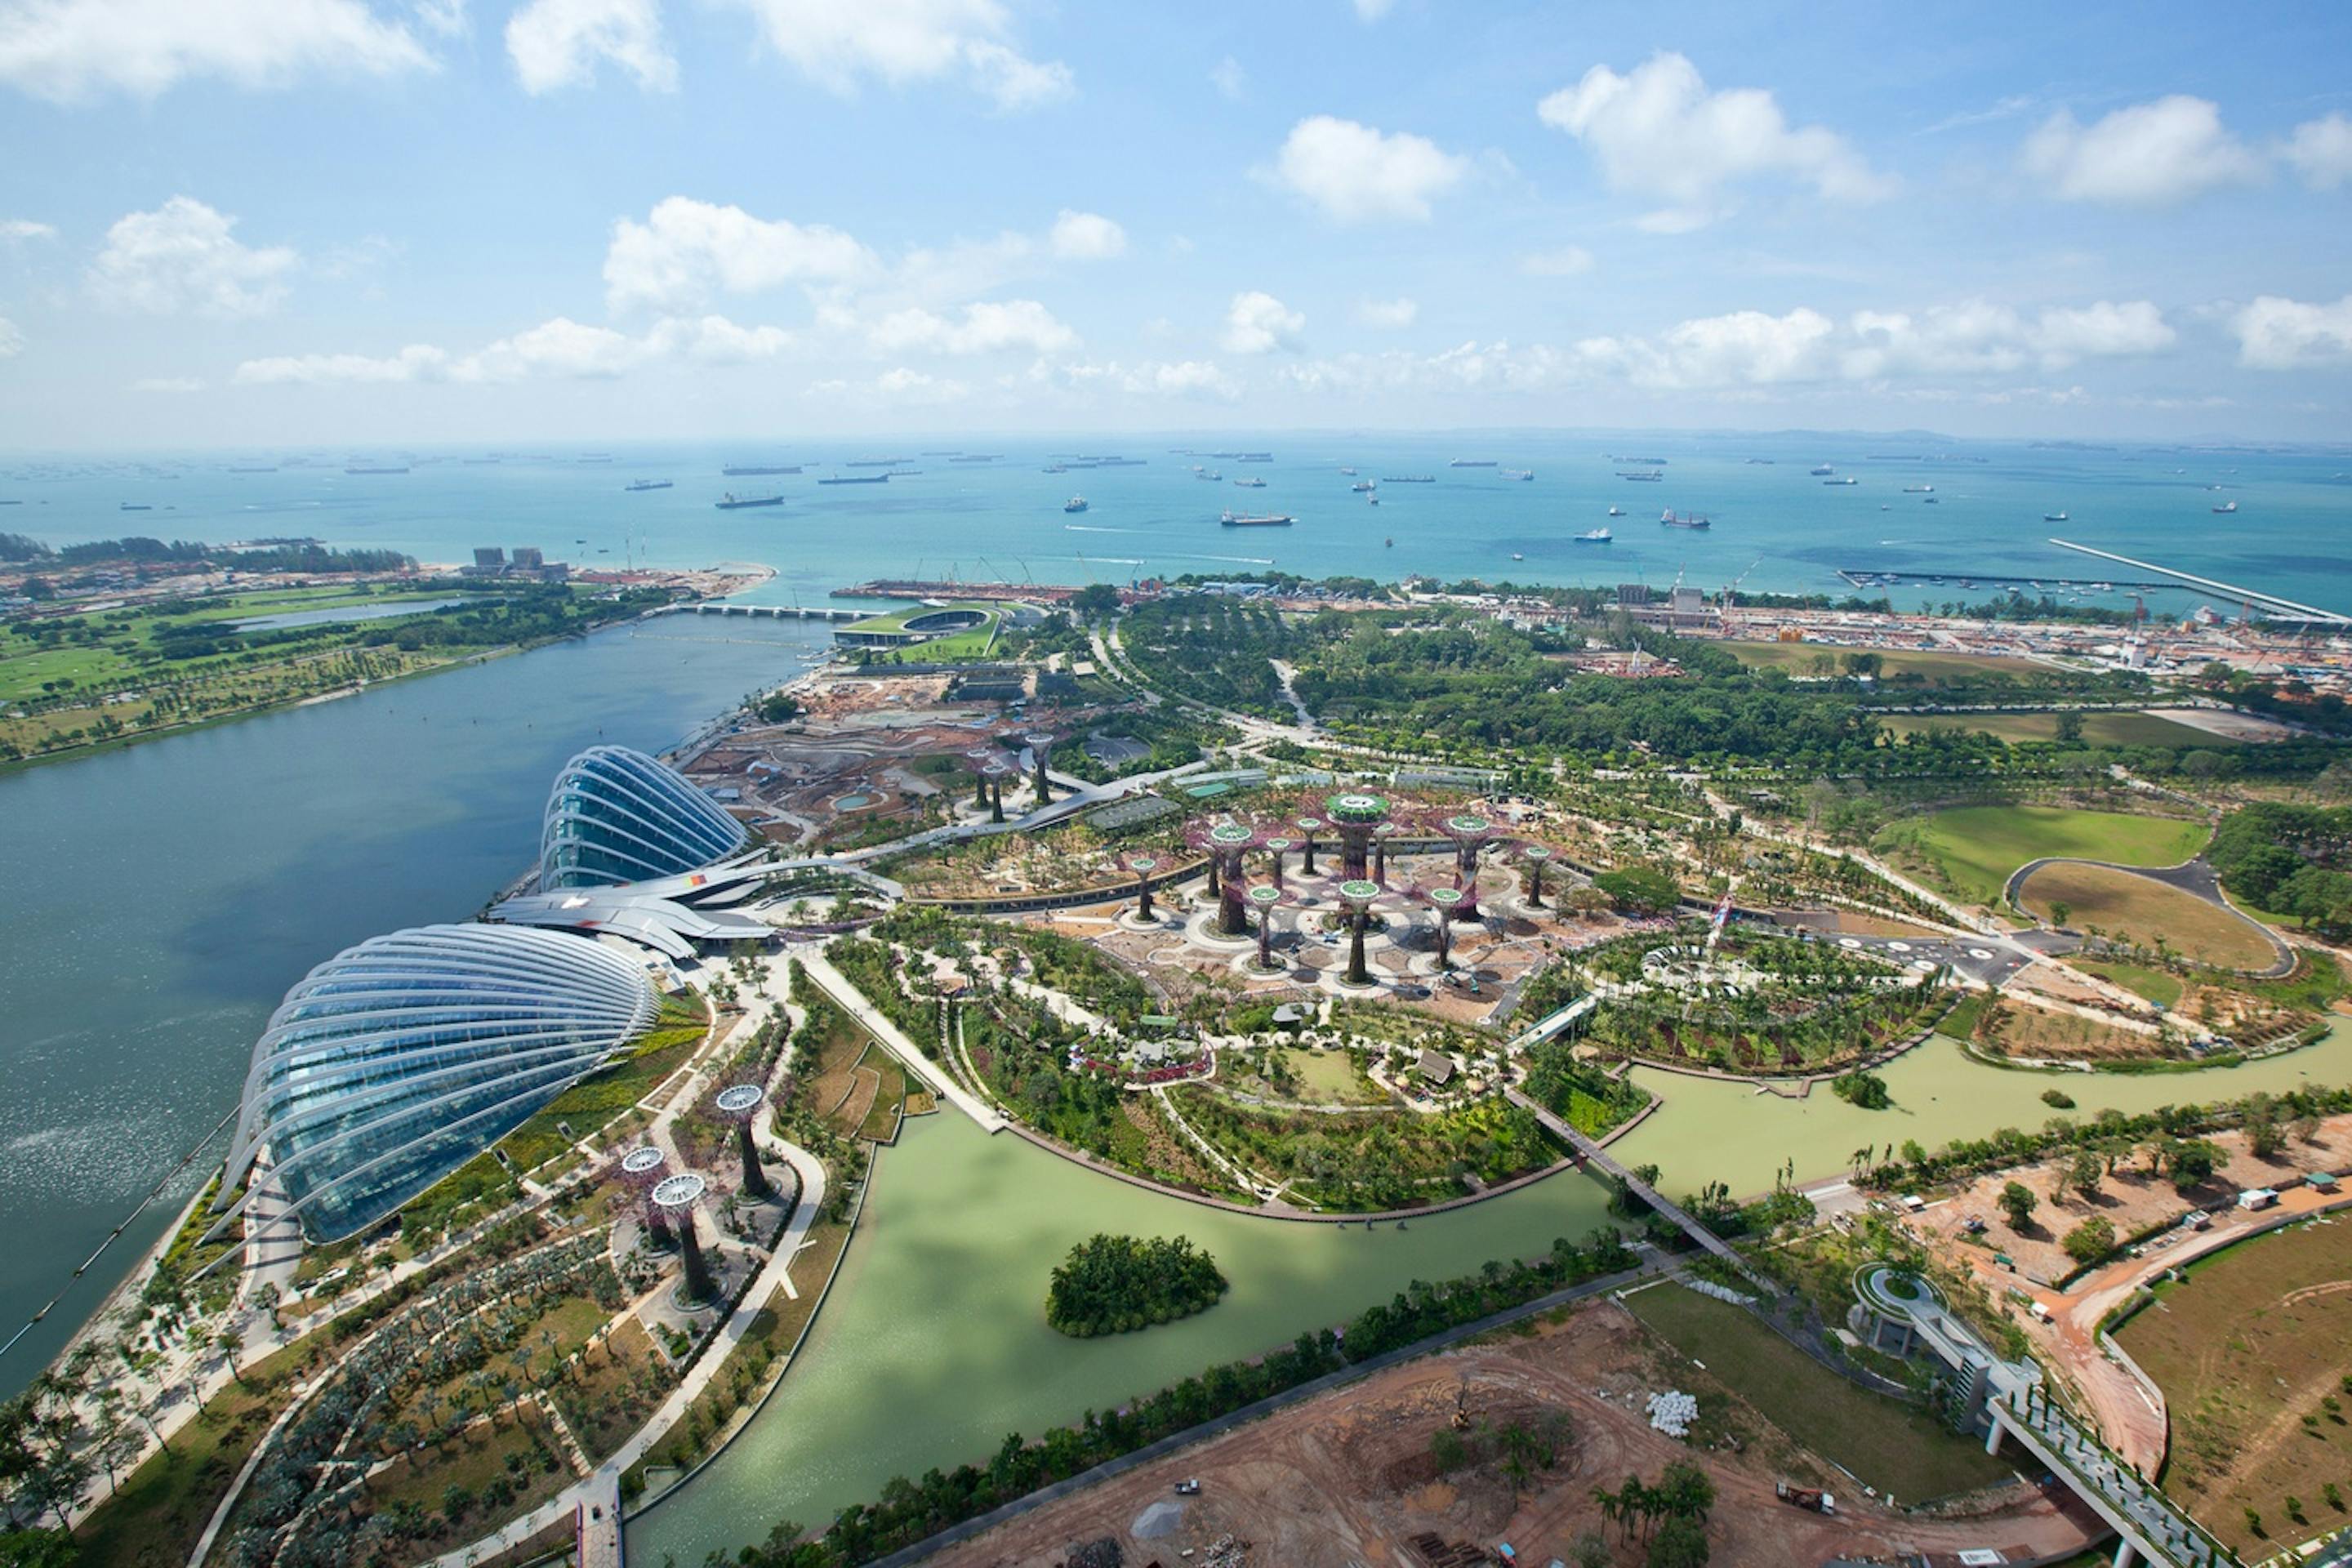 The billion-dollar Gardens by the Bay project is built on 101 hectares of land in Marina Bay, the heart of Singapore's Central Business District.